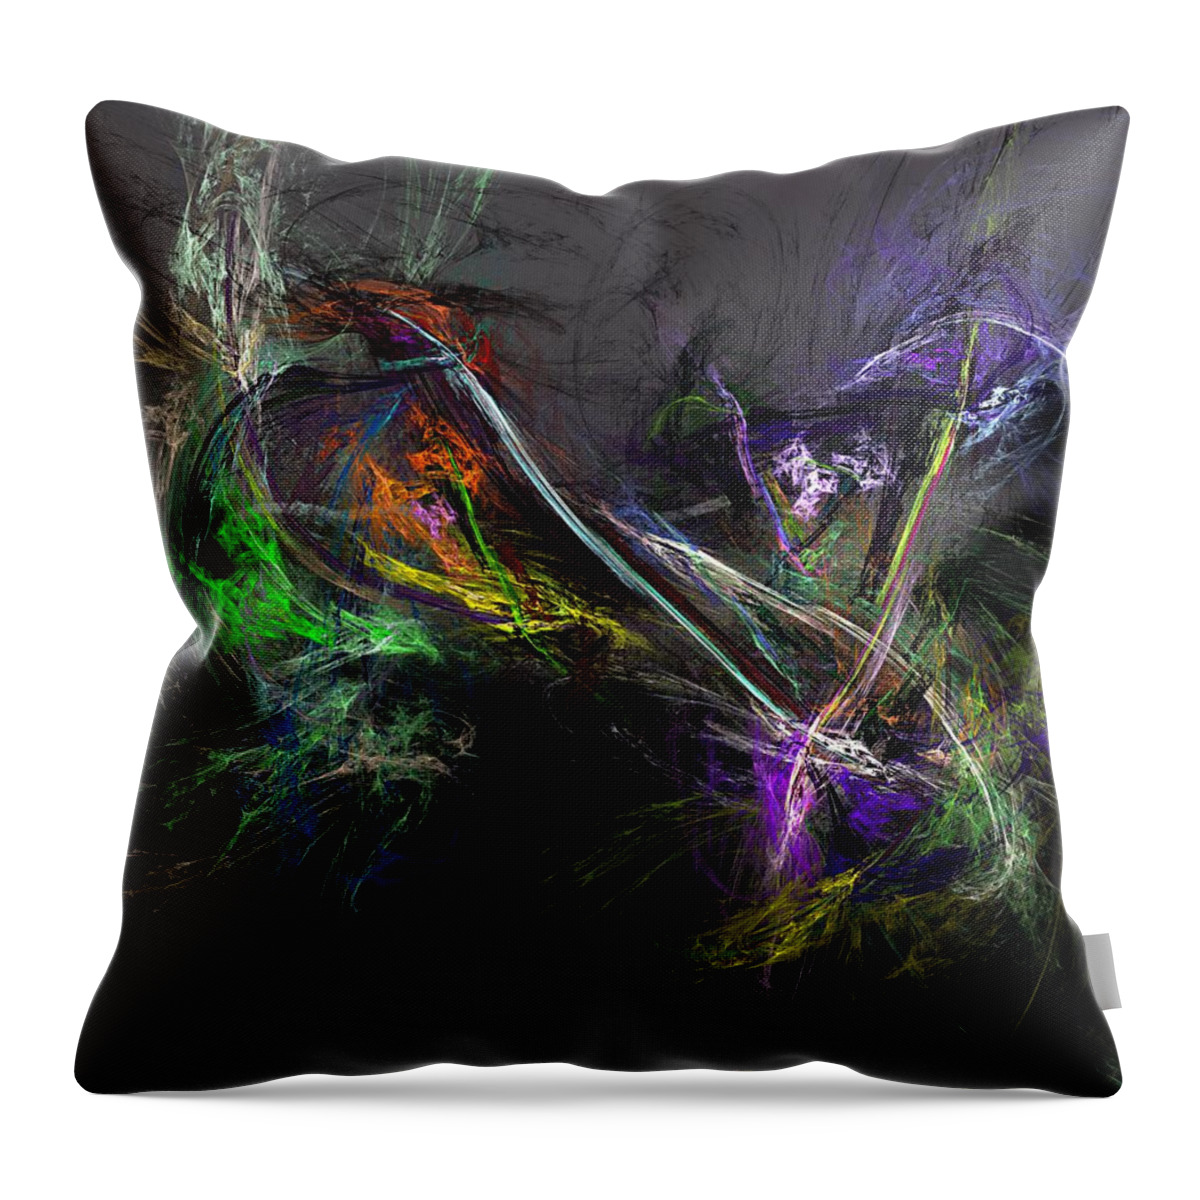 Fine Art Throw Pillow featuring the digital art Conflict #1 by David Lane